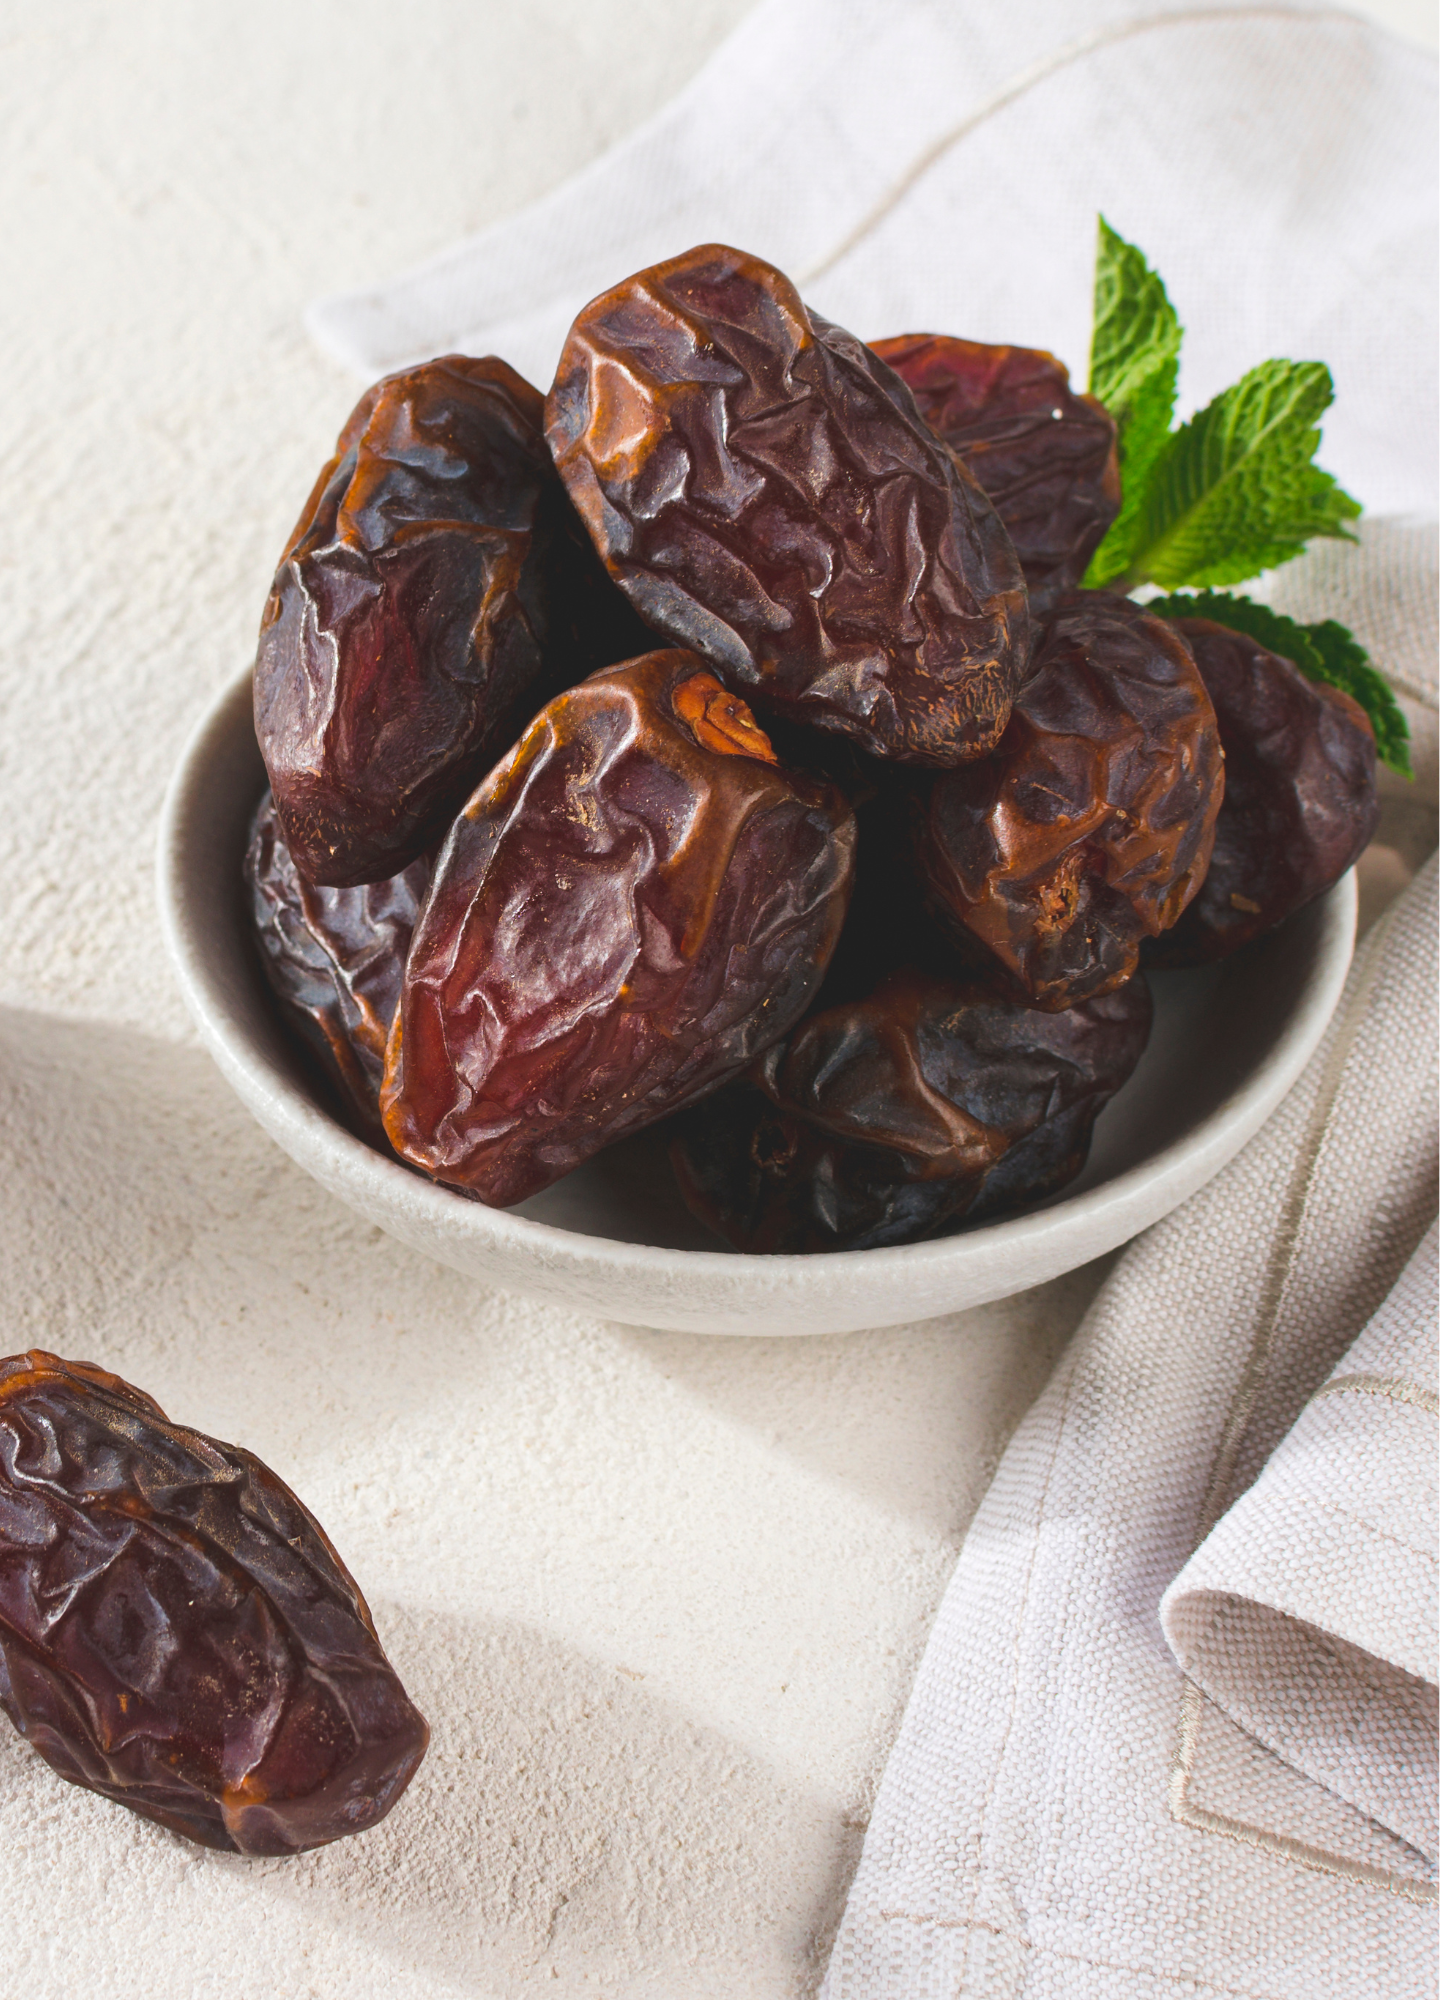 are dates good for constipation?